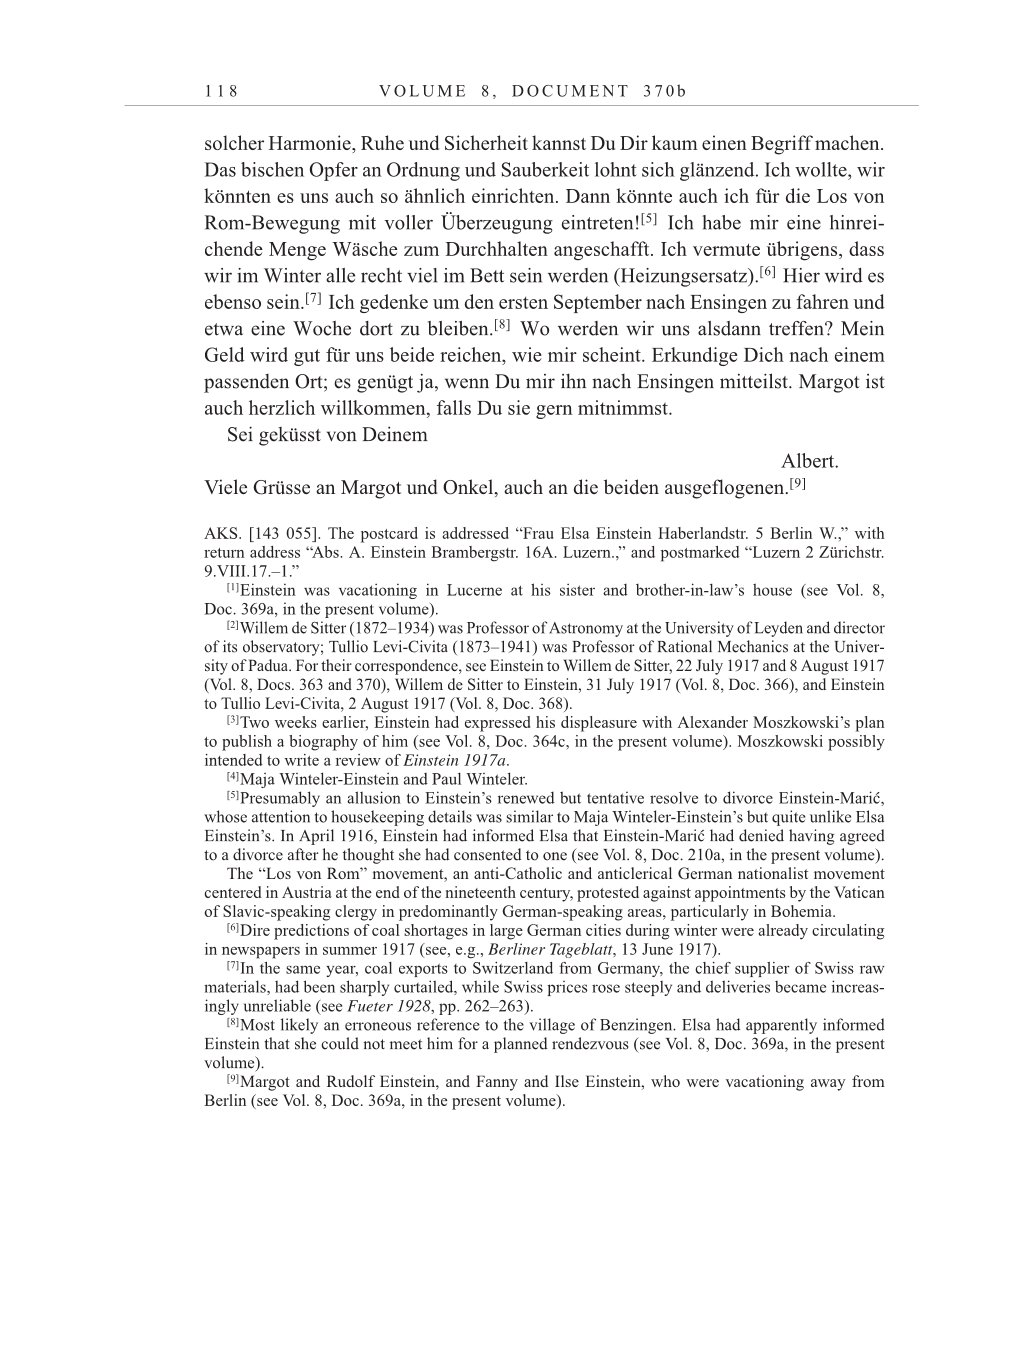 Volume 10: The Berlin Years: Correspondence May-December 1920 / Supplementary Correspondence 1909-1920 page 118